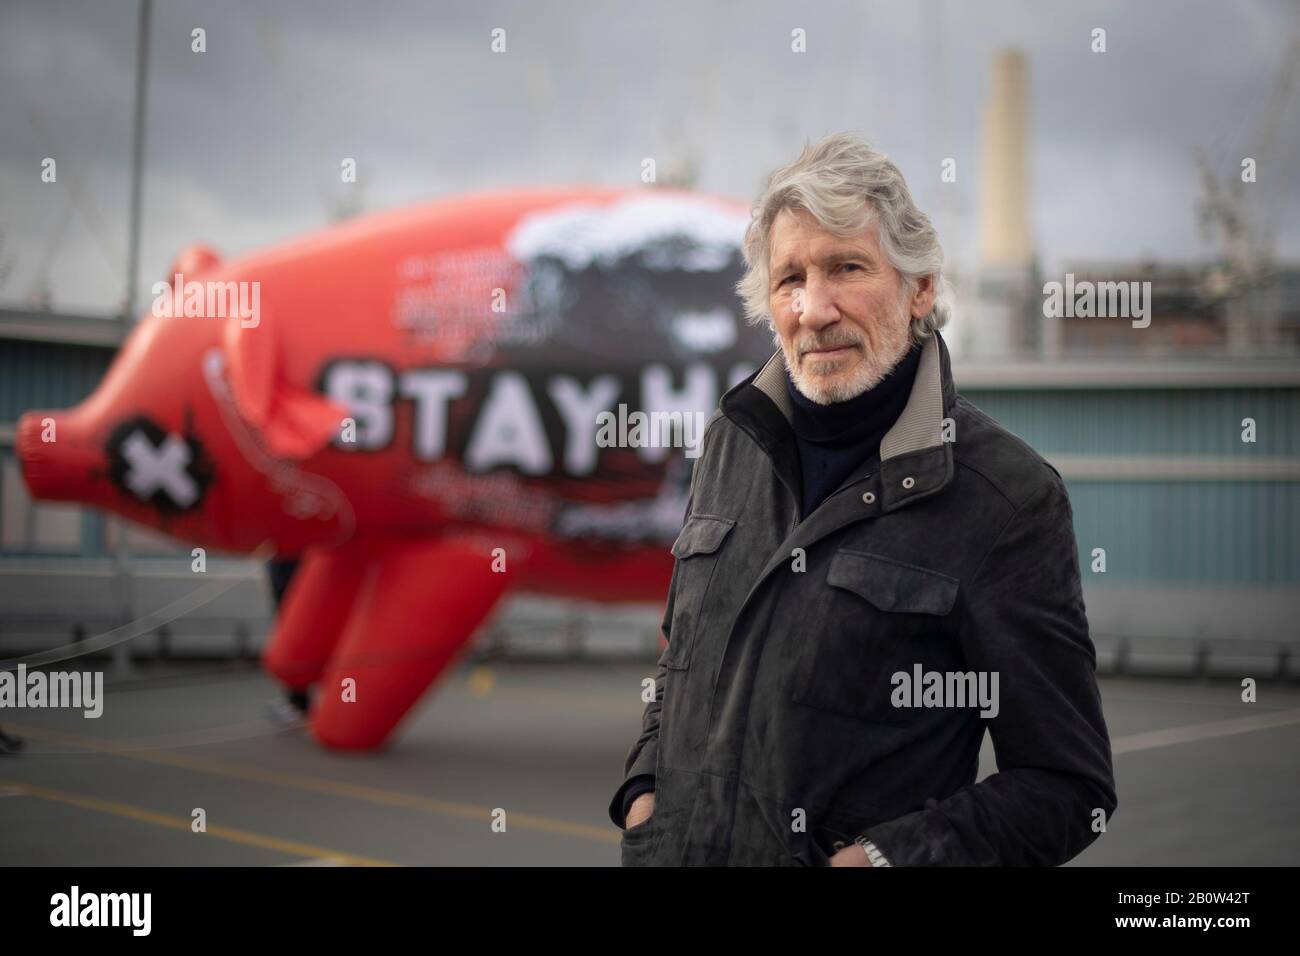 Roger Waters, co-founder and bassist in rock band Pink Floyd, who has announced his participation in a 'Free Assange' rally taking place on Saturday in London. PA Photo. Picture date: Friday February 21, 2020. See PA story POLITICS Assange. Photo credit should read: Victoria Jones/PA Wire Stock Photo